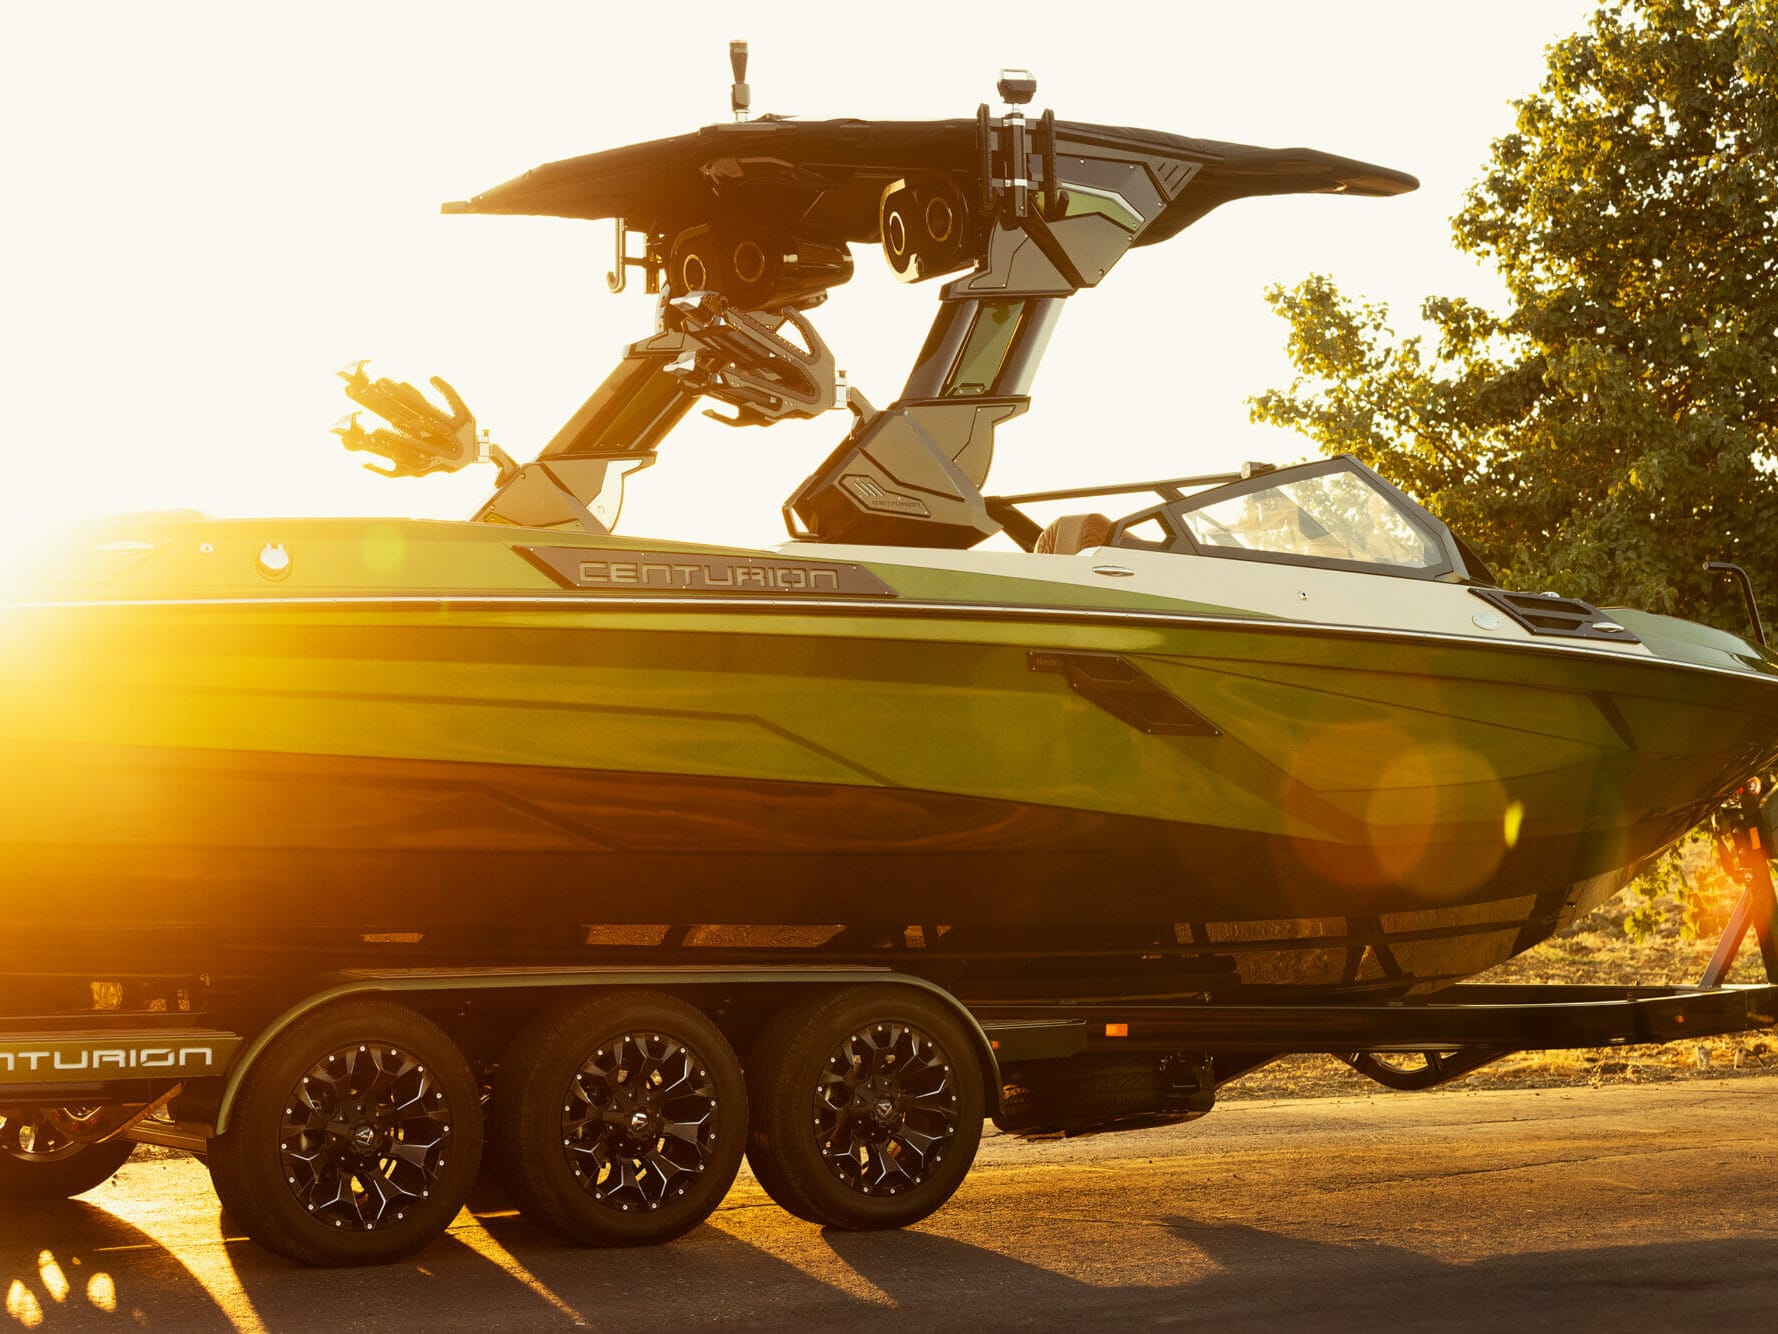 A green and black wakesurf boat on a trailer.